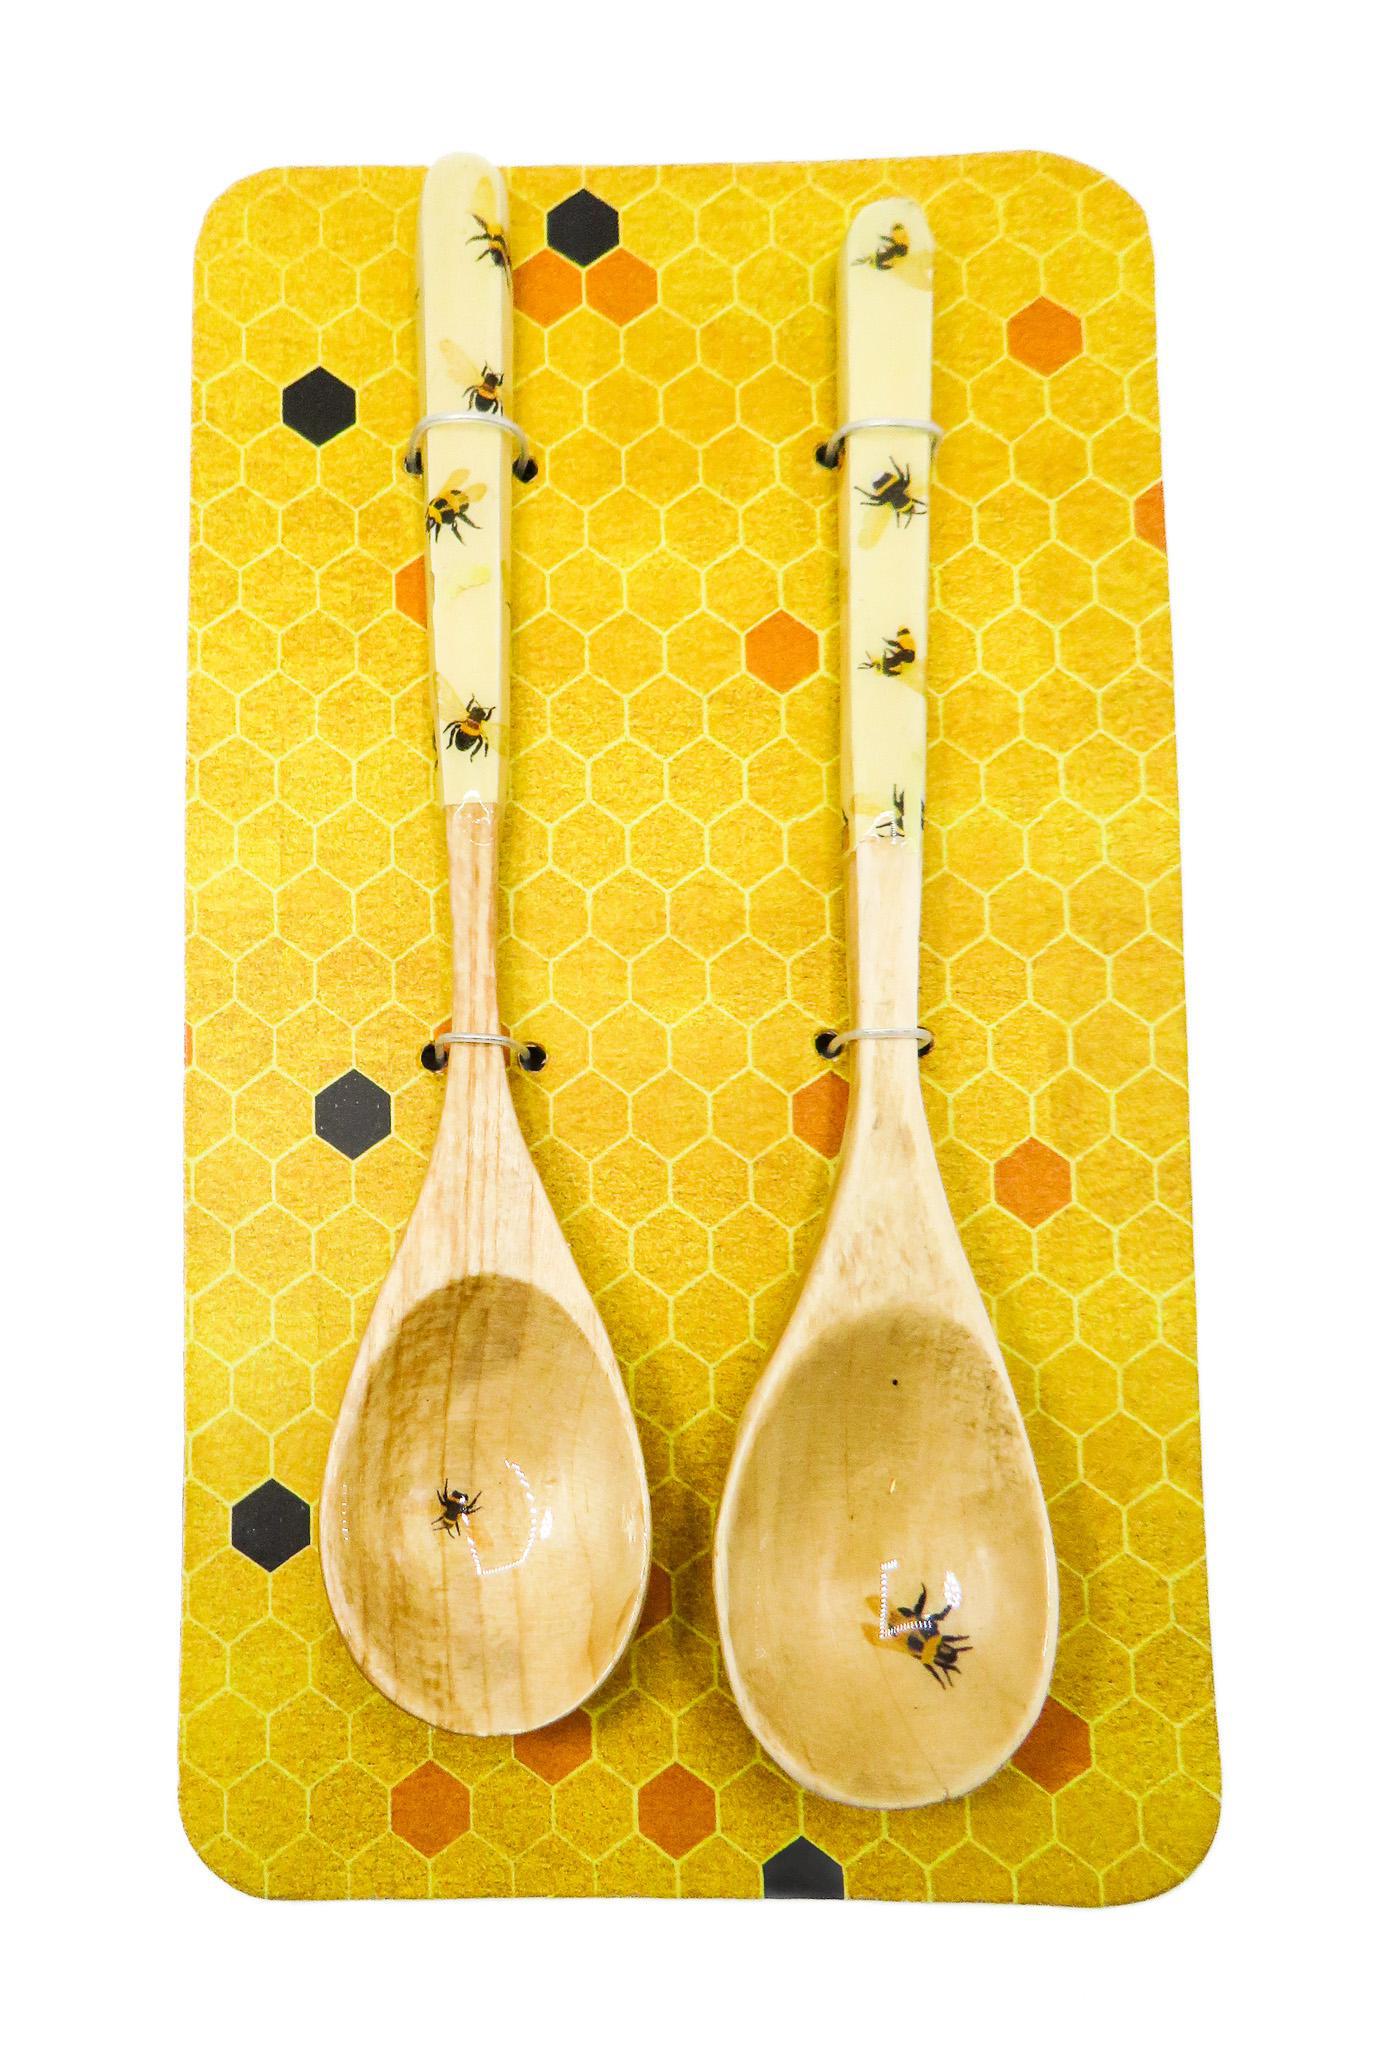 2 Bee Spoon Set - Rustic Wooden Spoons for Cooking & Serving